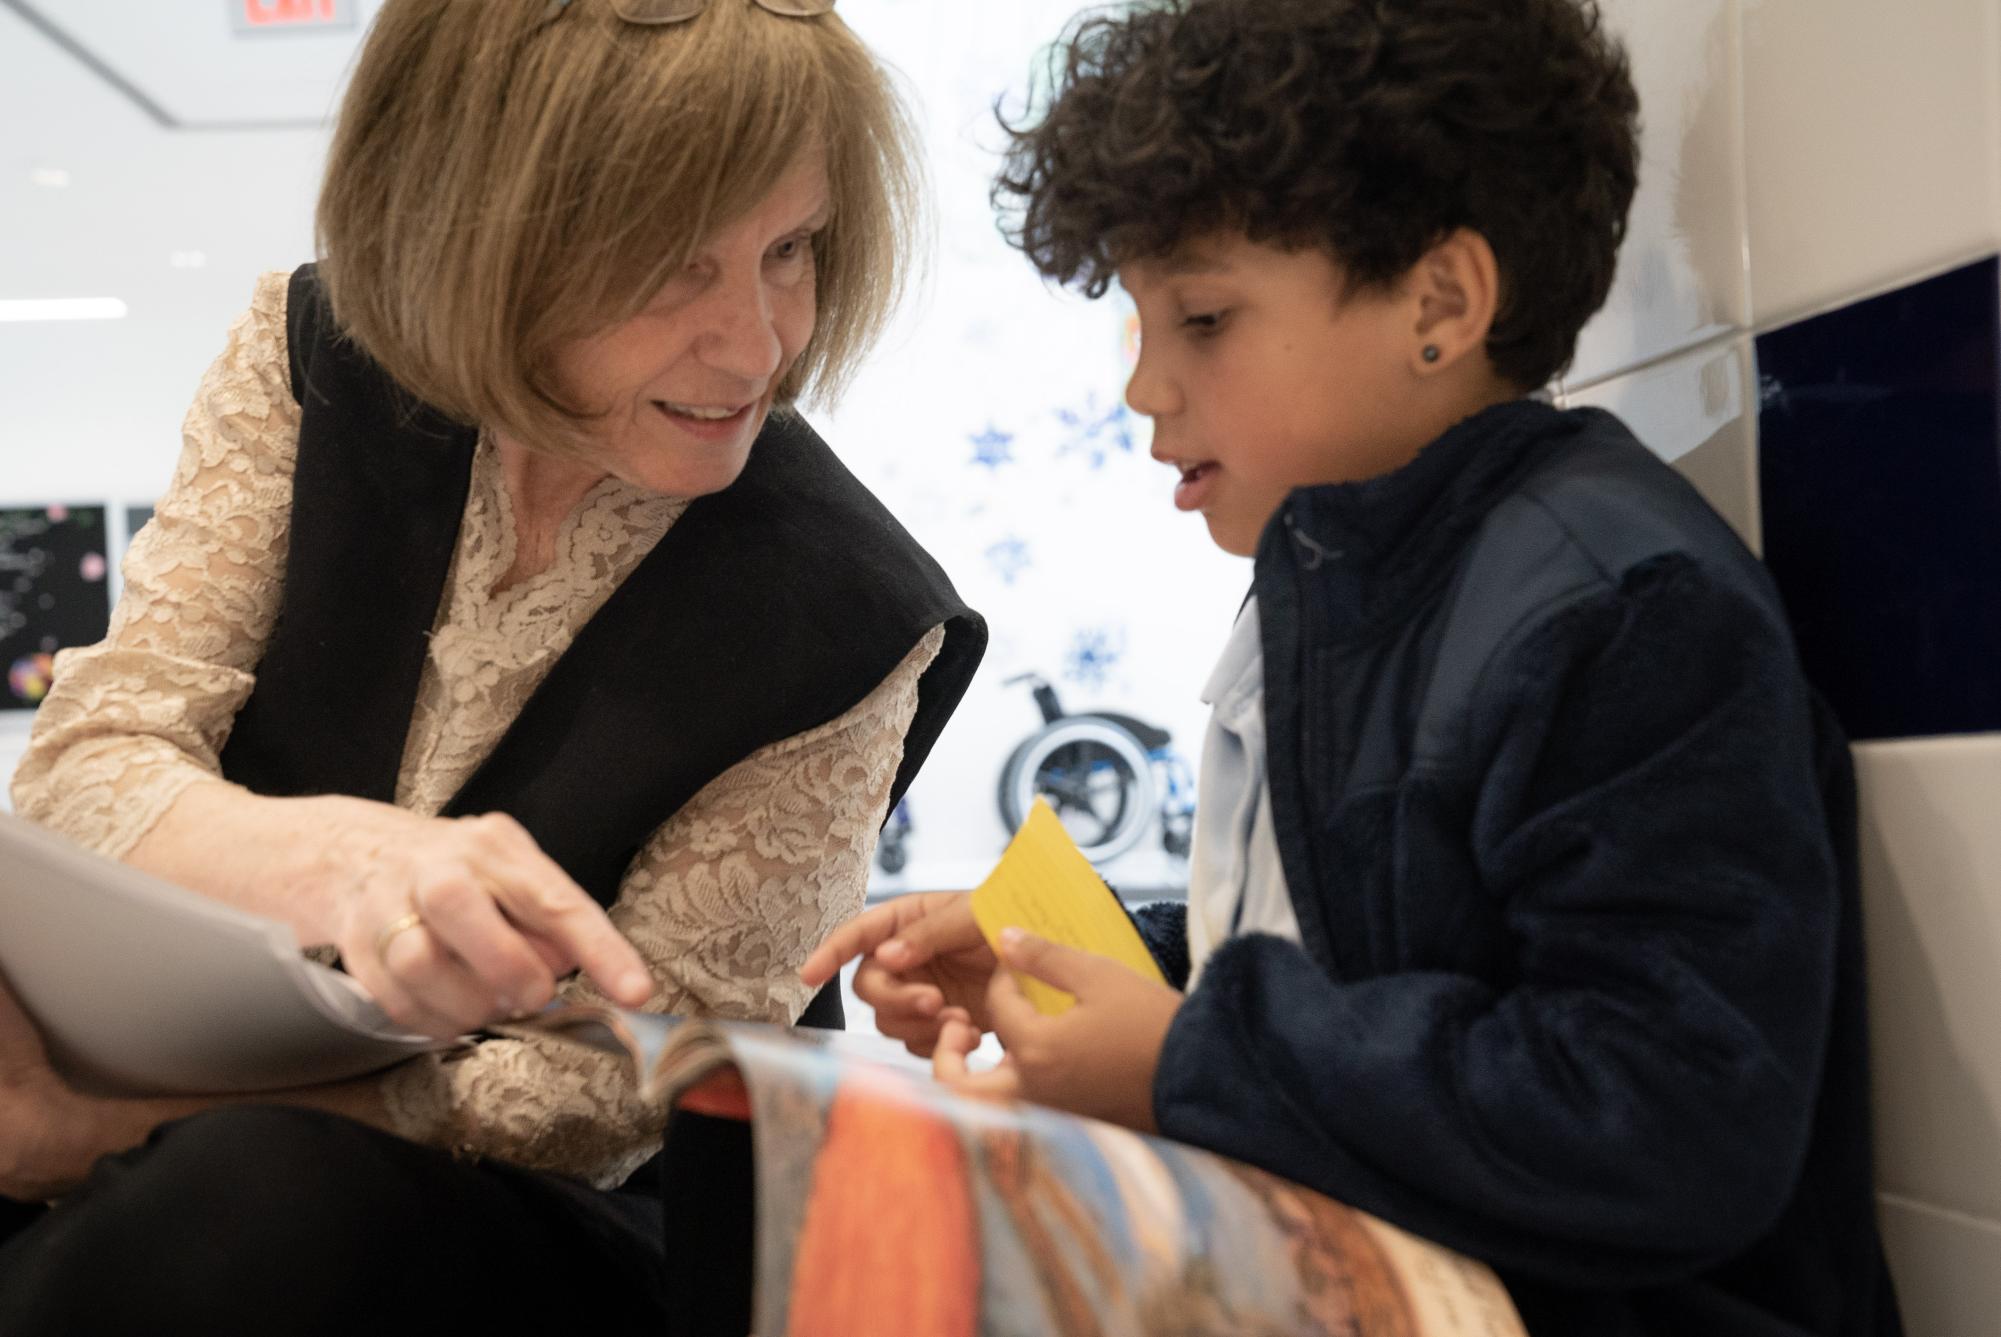 Lucy Calkins works with an elementary-school student learning to read using her Units of Study curriculum. (Photo courtesy of Lucy Calkins.)